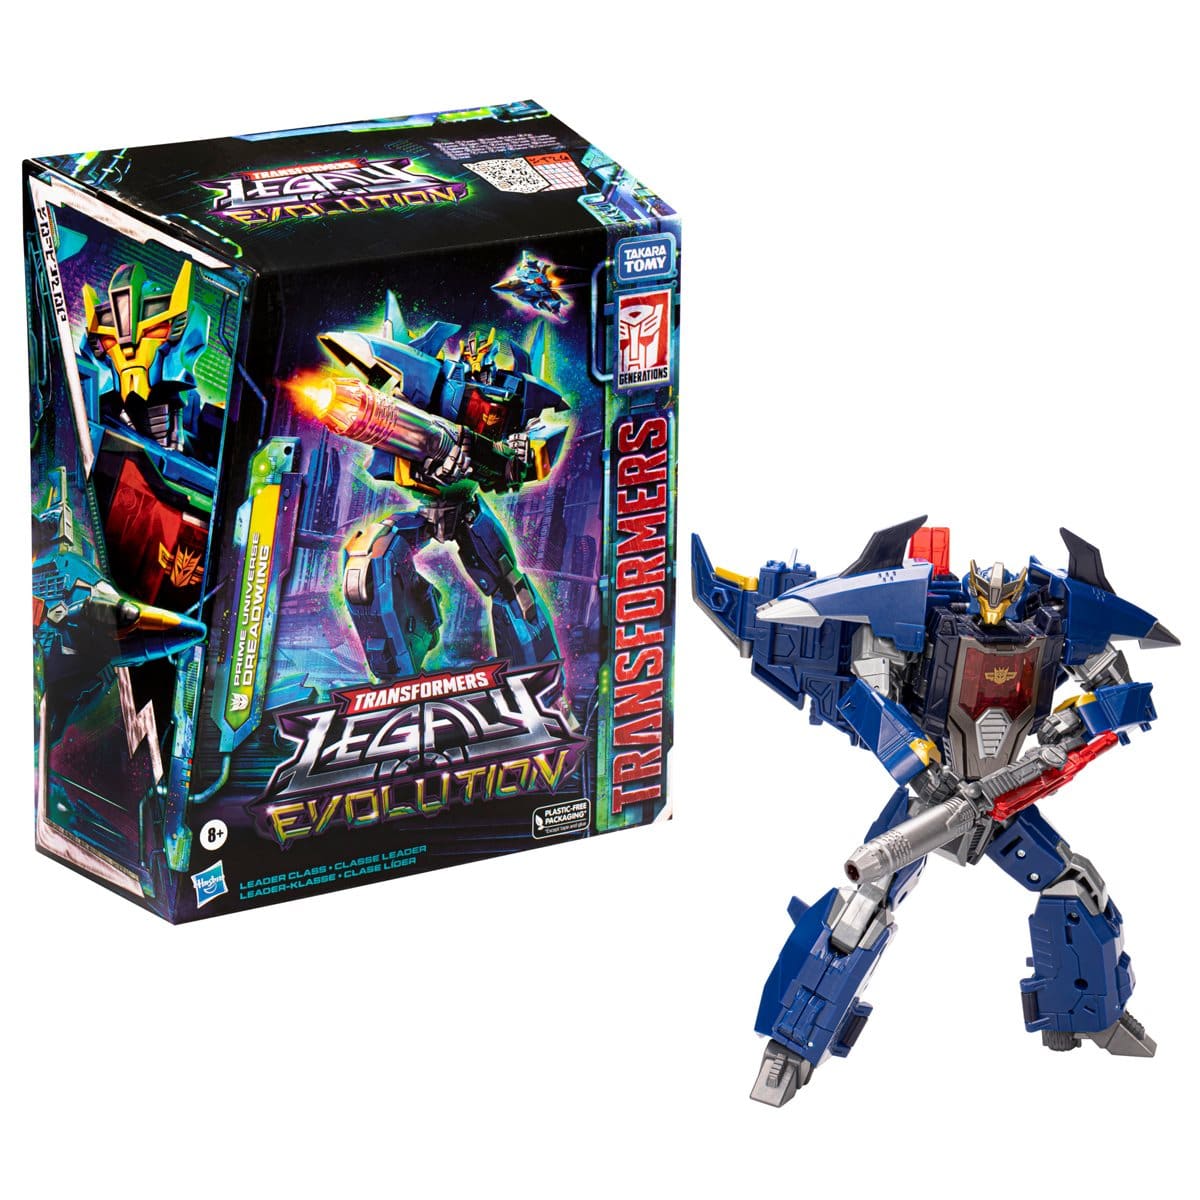 Transformers-Toys-Legacy-Evolution-Leader-Class-Dreadwing